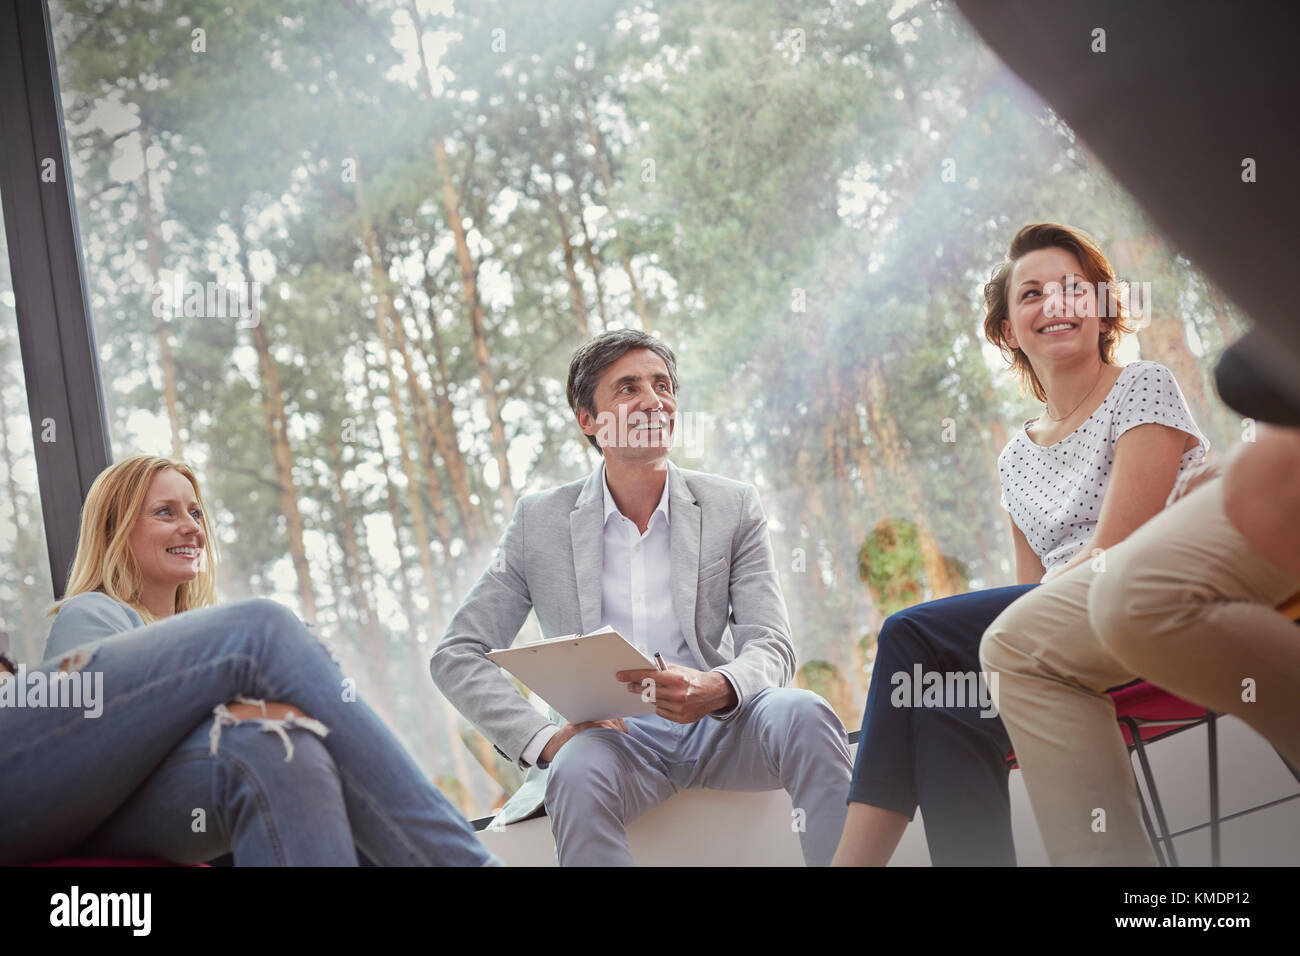 Smiling people talking in group therapy session Stock Photo